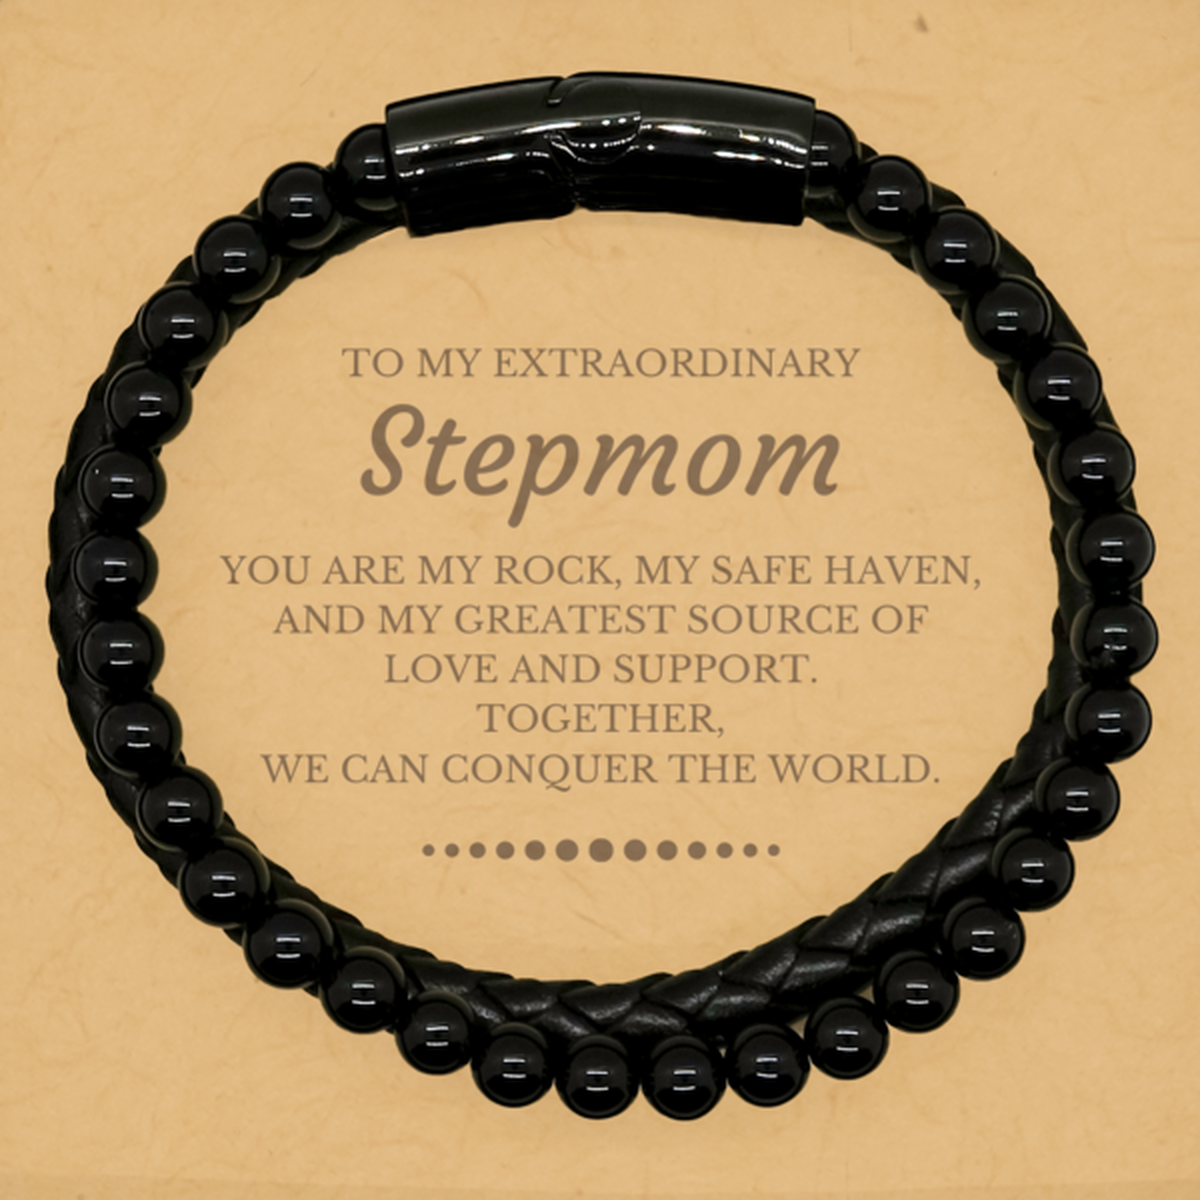 To My Extraordinary Stepmom Gifts, Together, we can conquer the world, Birthday Stone Leather Bracelets For Stepmom, Christmas Gifts For Stepmom